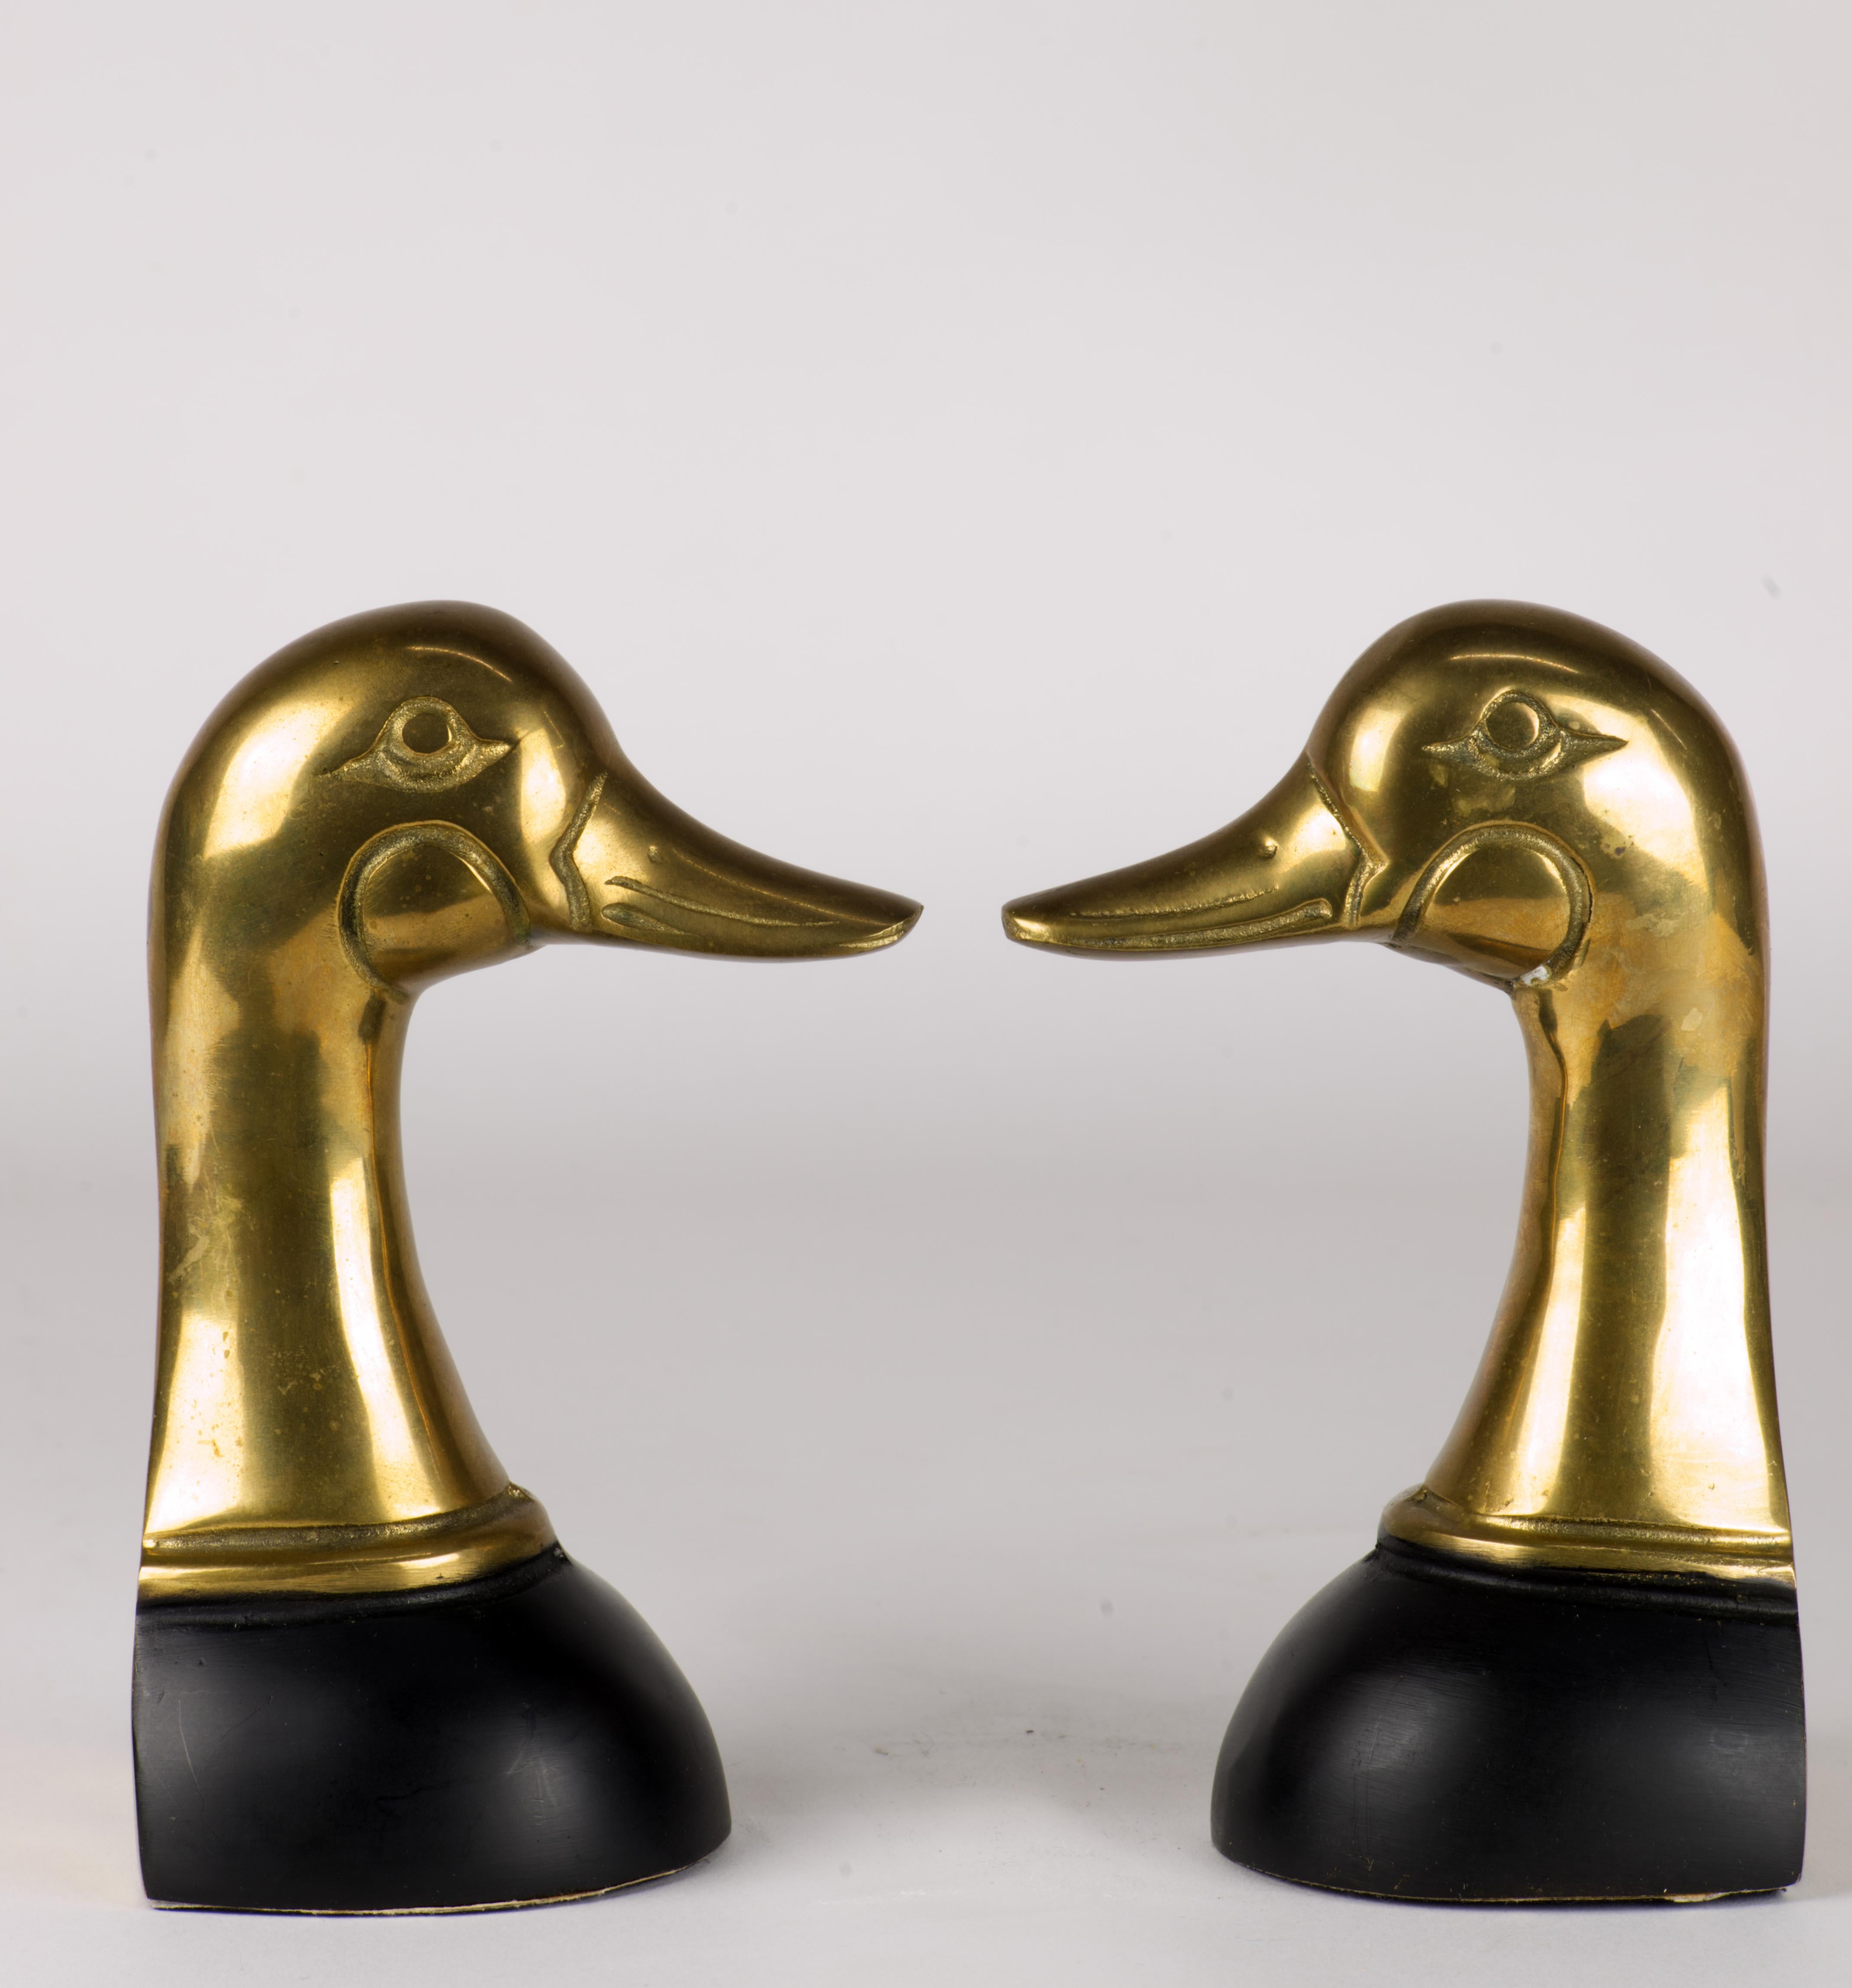 Pair of Cast Brass Mallard Duck Bookends Mid Century Modern In Good Condition For Sale In Clifton Springs, NY